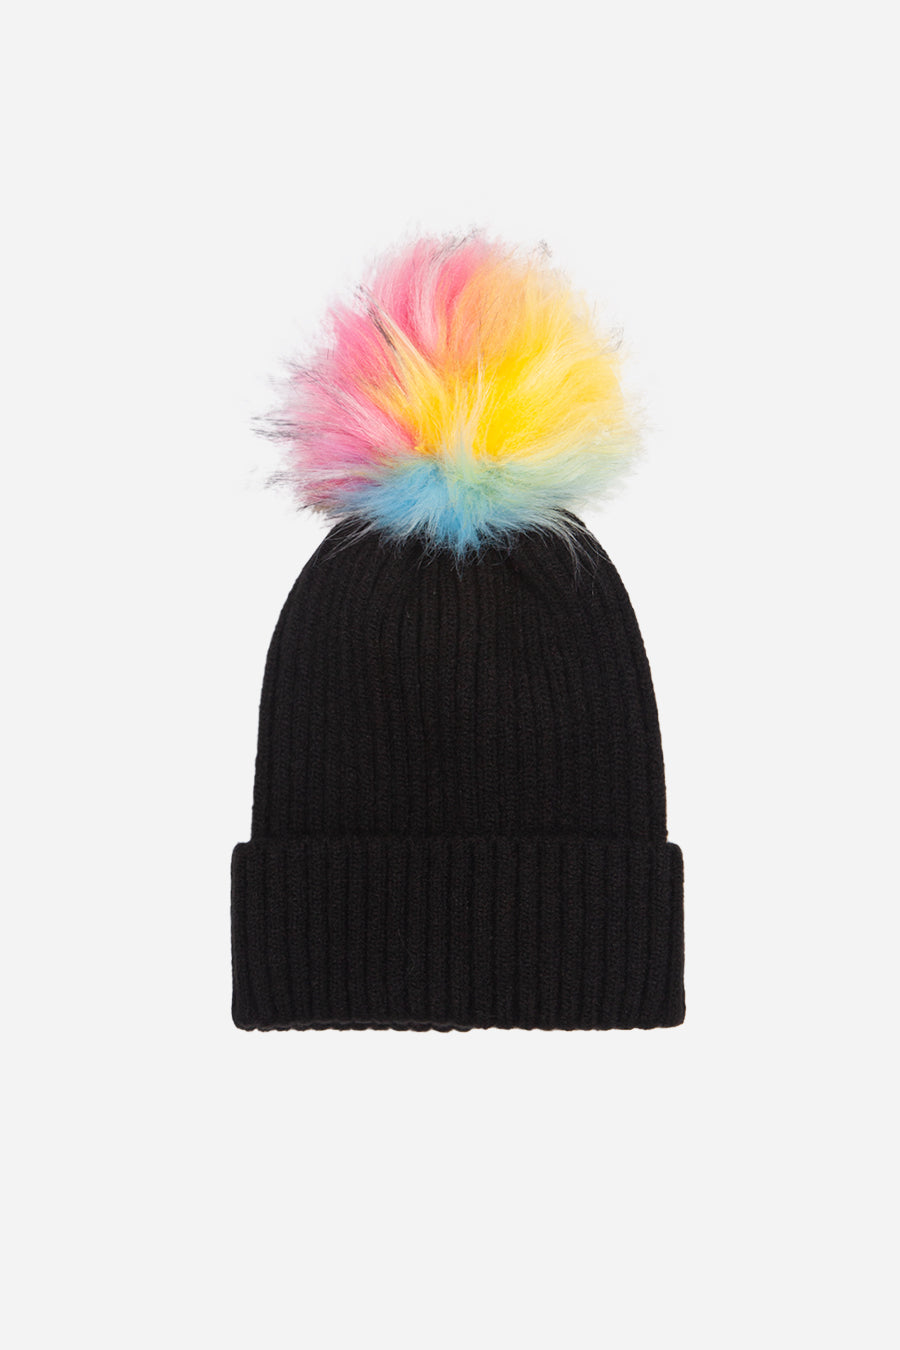 Black Knitted Hat with Bright Multi Coloured Removable Faux Fur Pom Pom